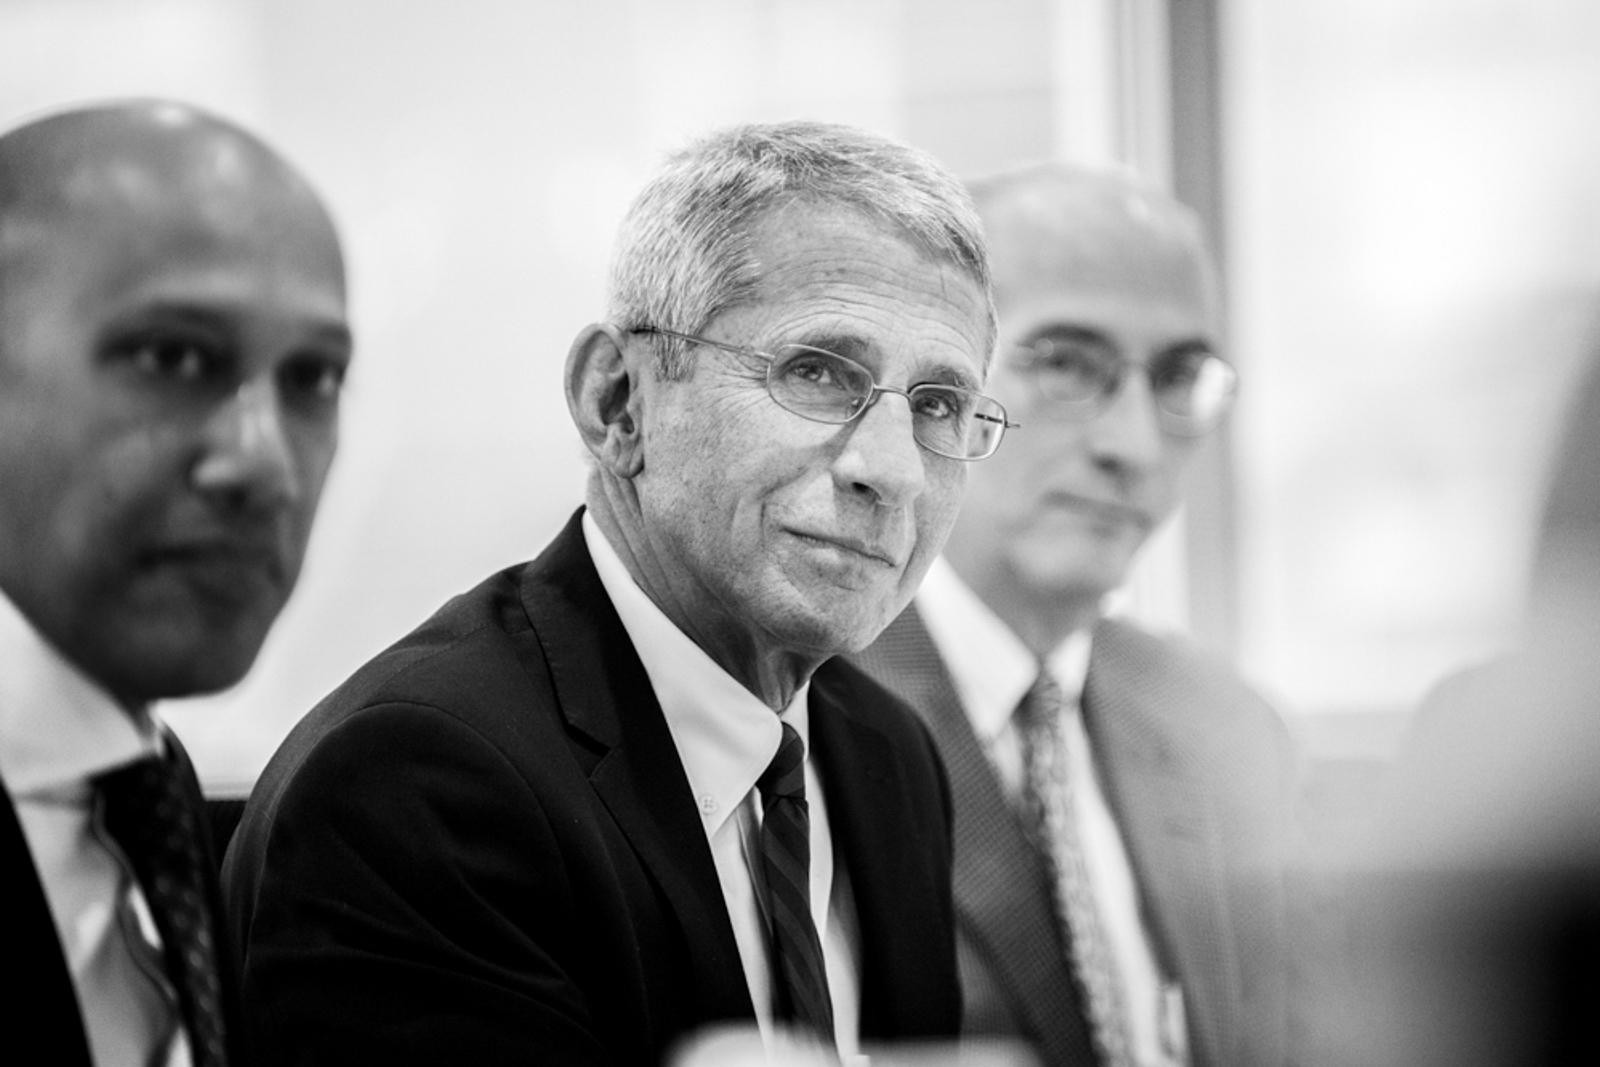 Candid of Dr Anthony Fauci in a meeting 